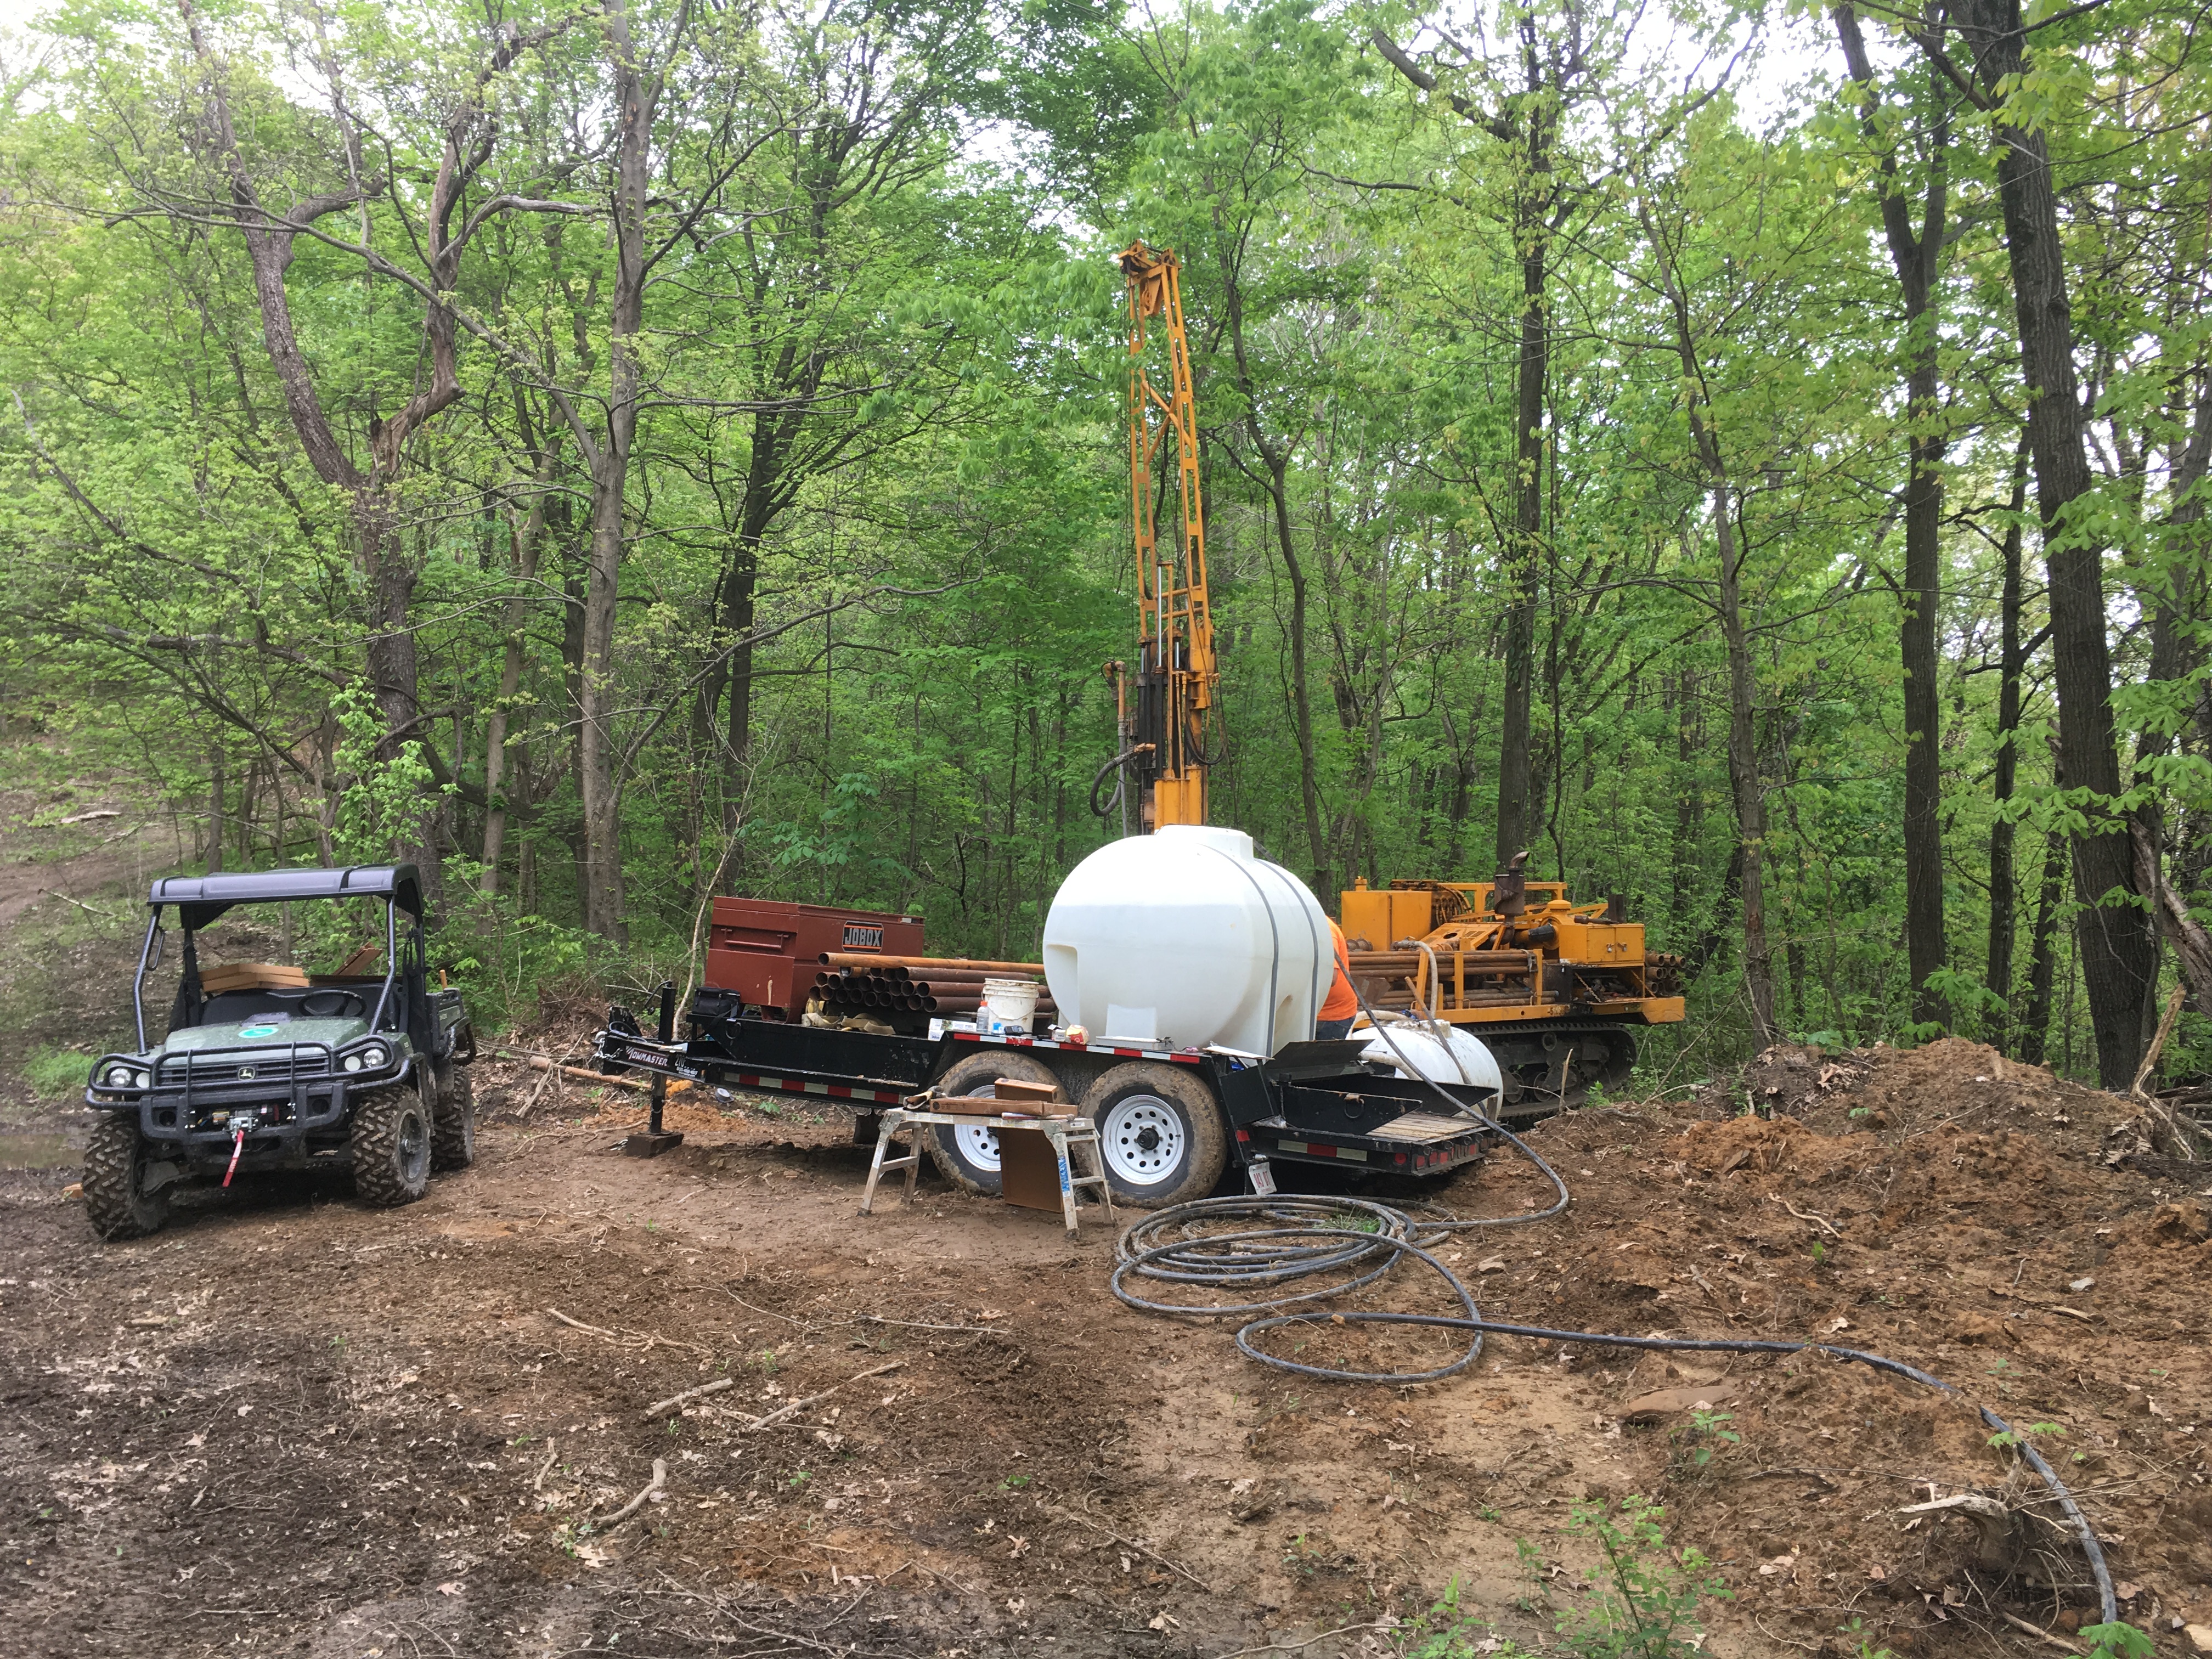 CME 850 Rig Drilling on a Remote Hilltop